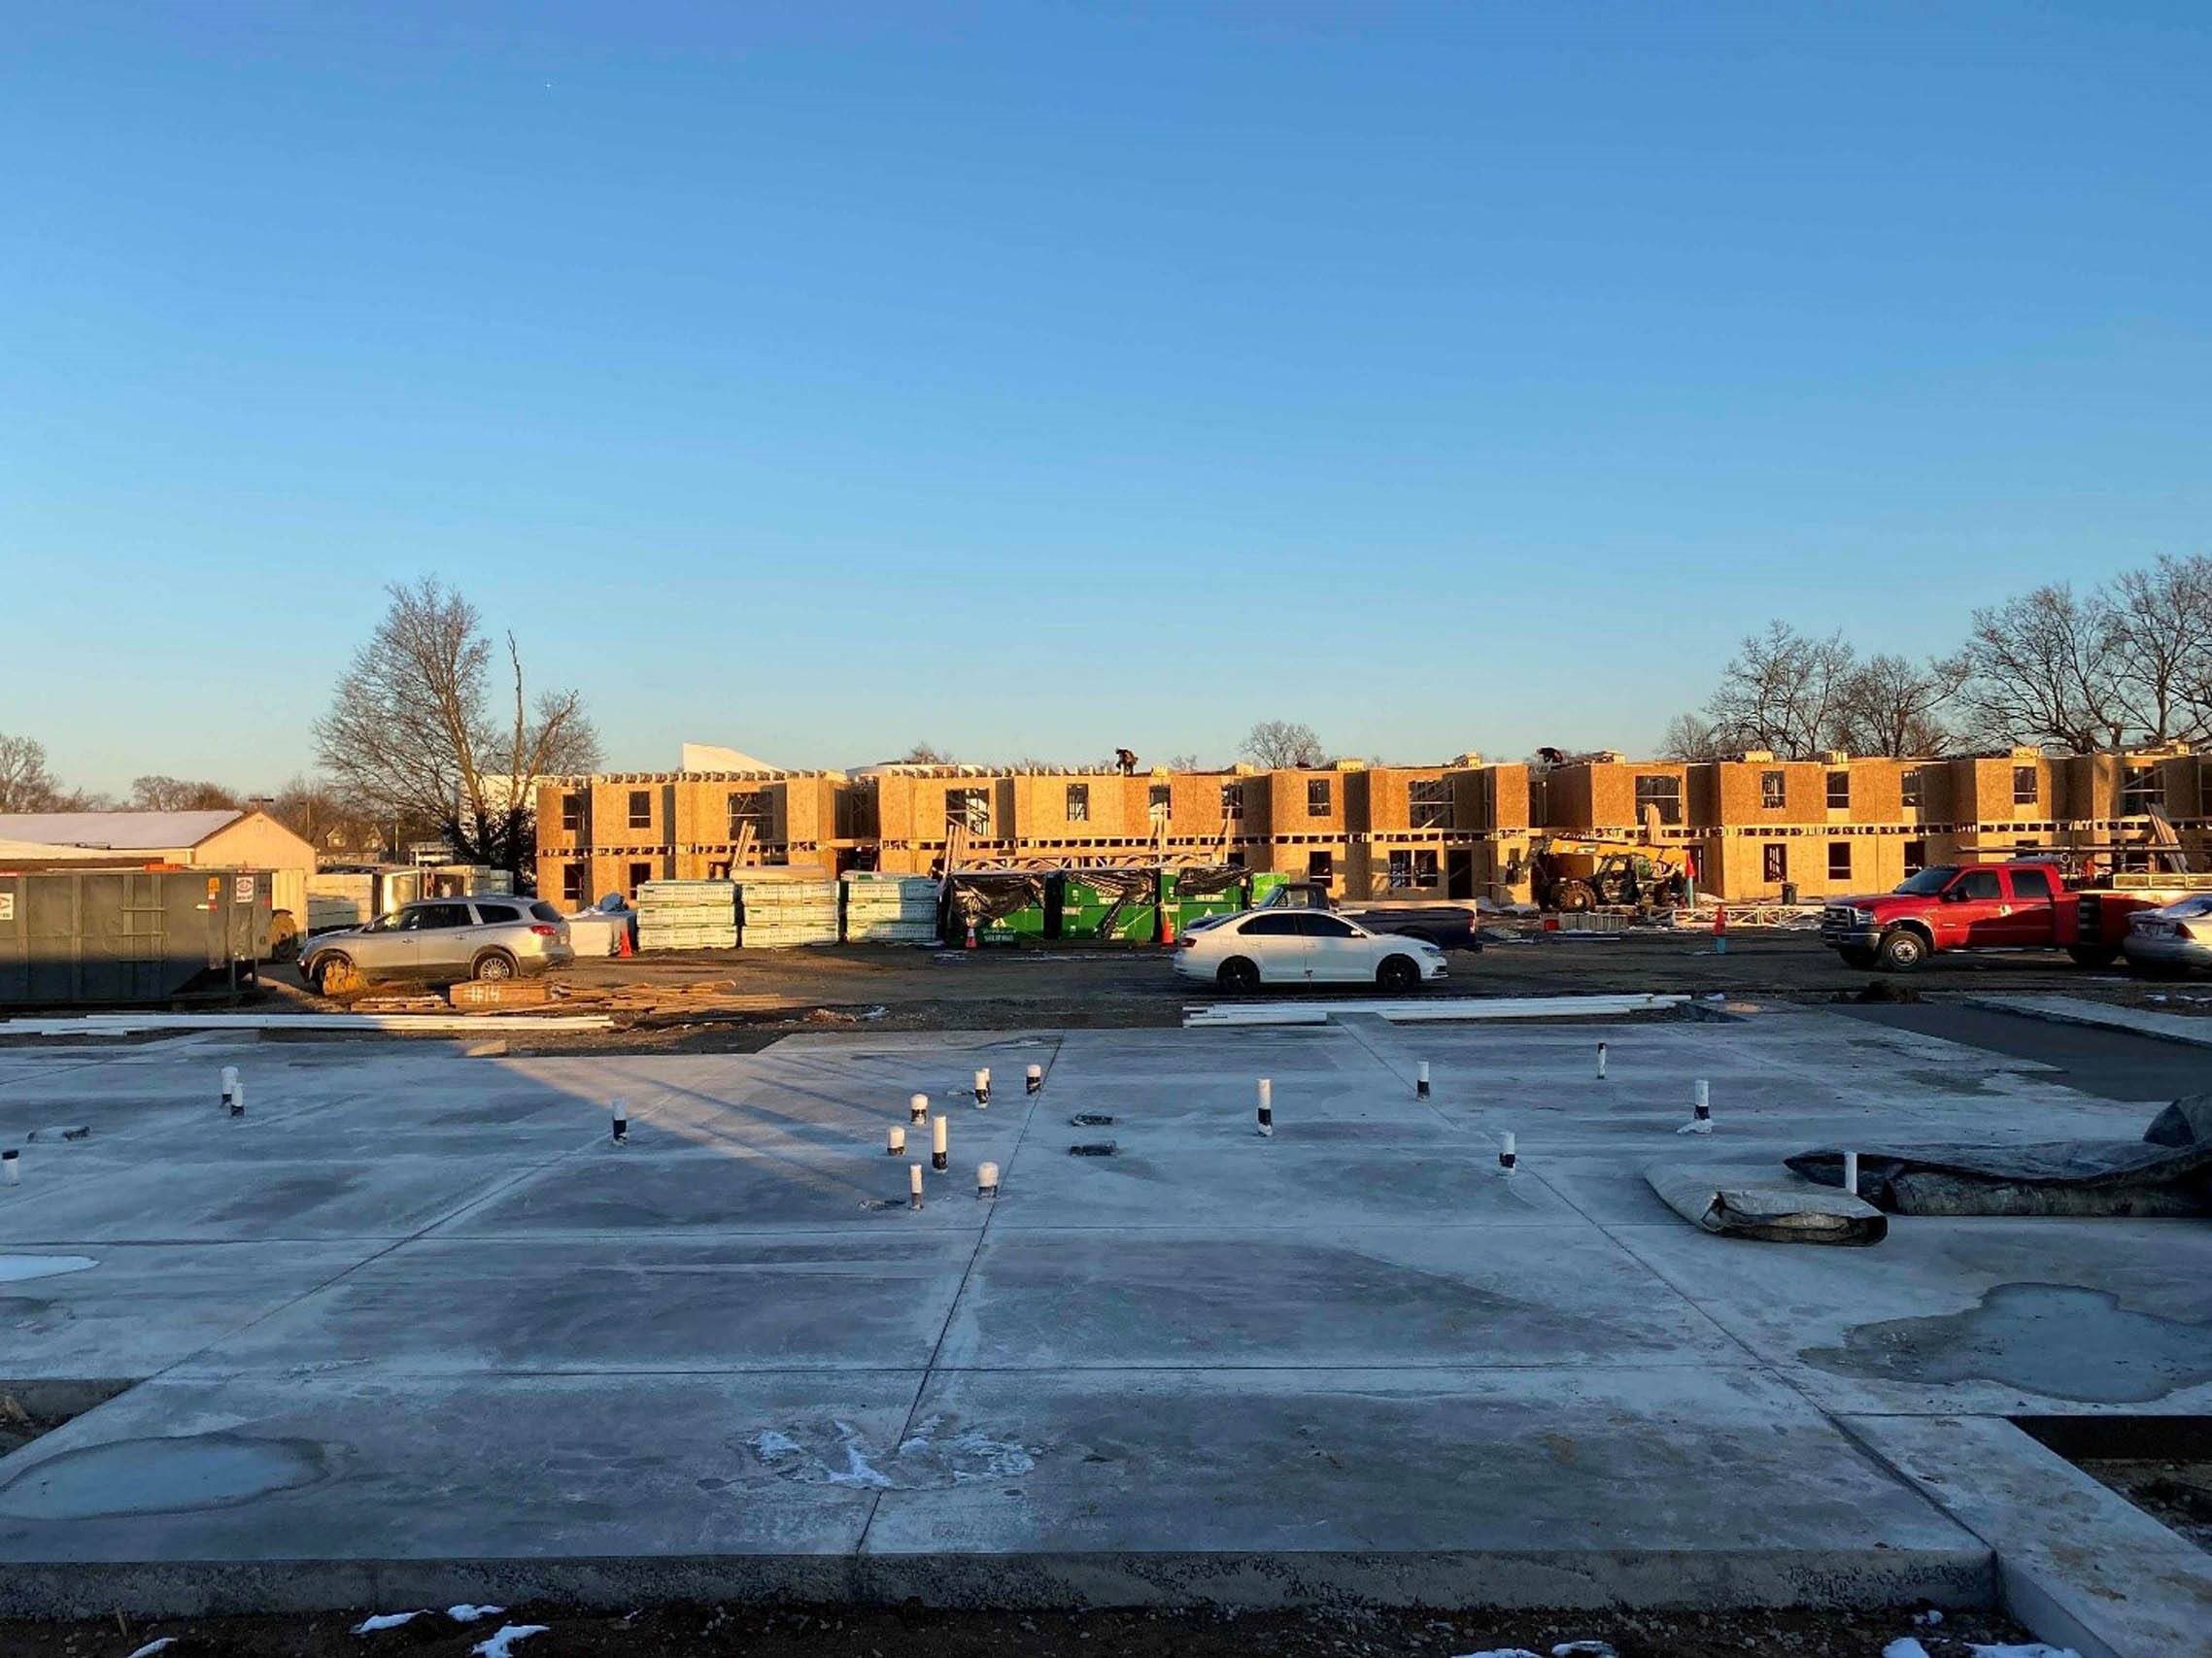 a view of a parking lot with apartments in the background